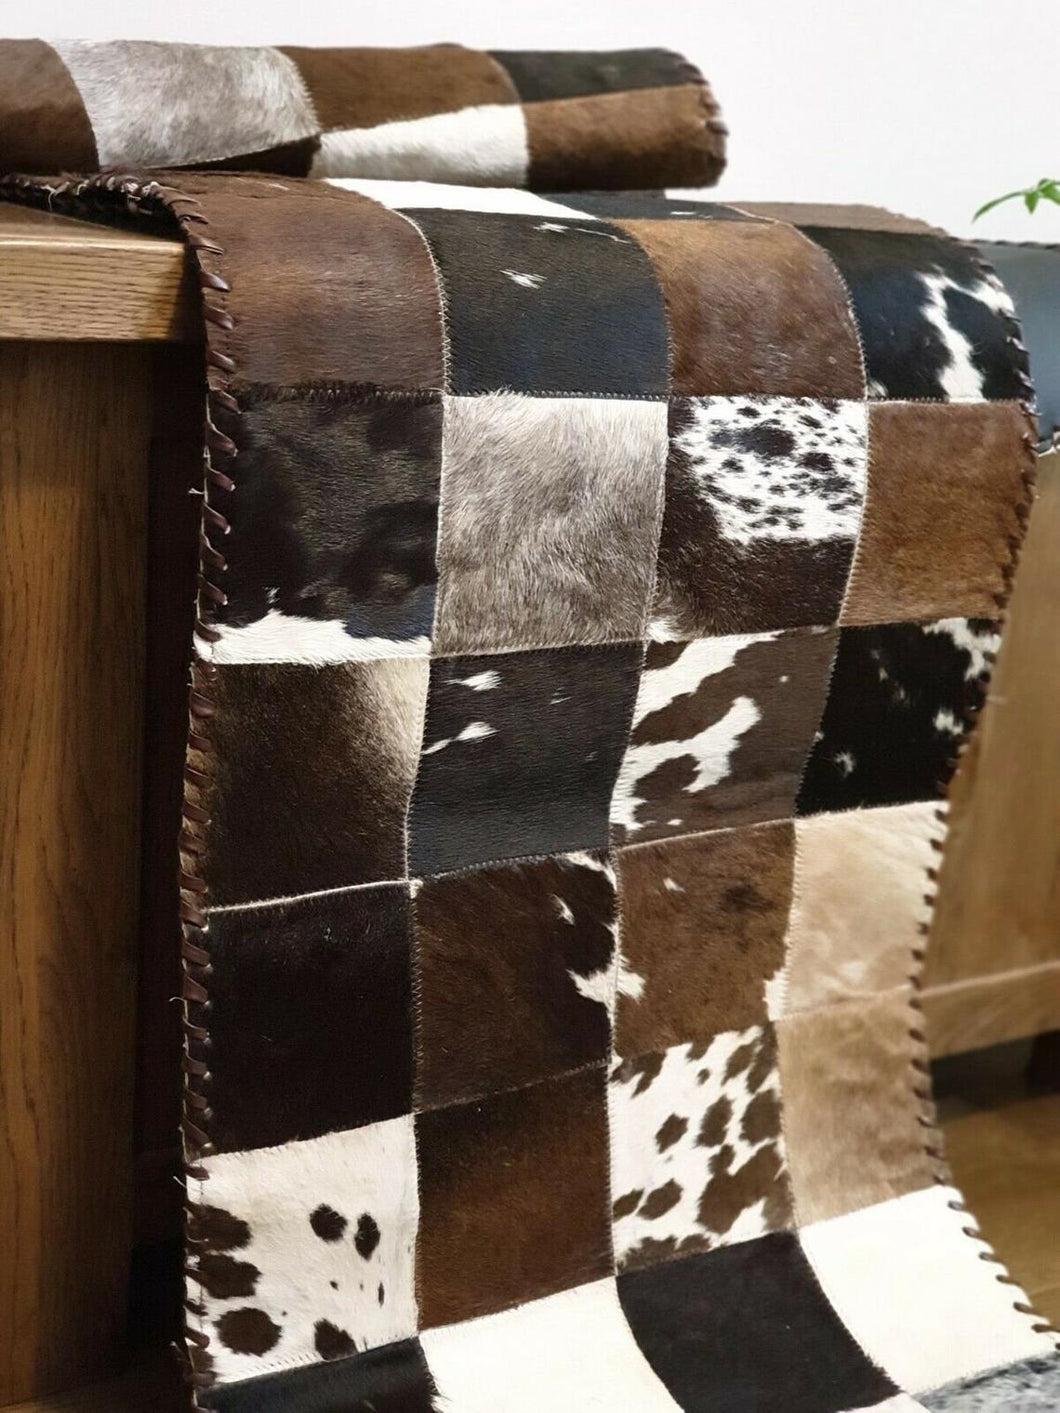 Handmade 100% Natural Cowhide Table Runner | Hair on Leather Multicolor Patchwork Cow hide Table Top